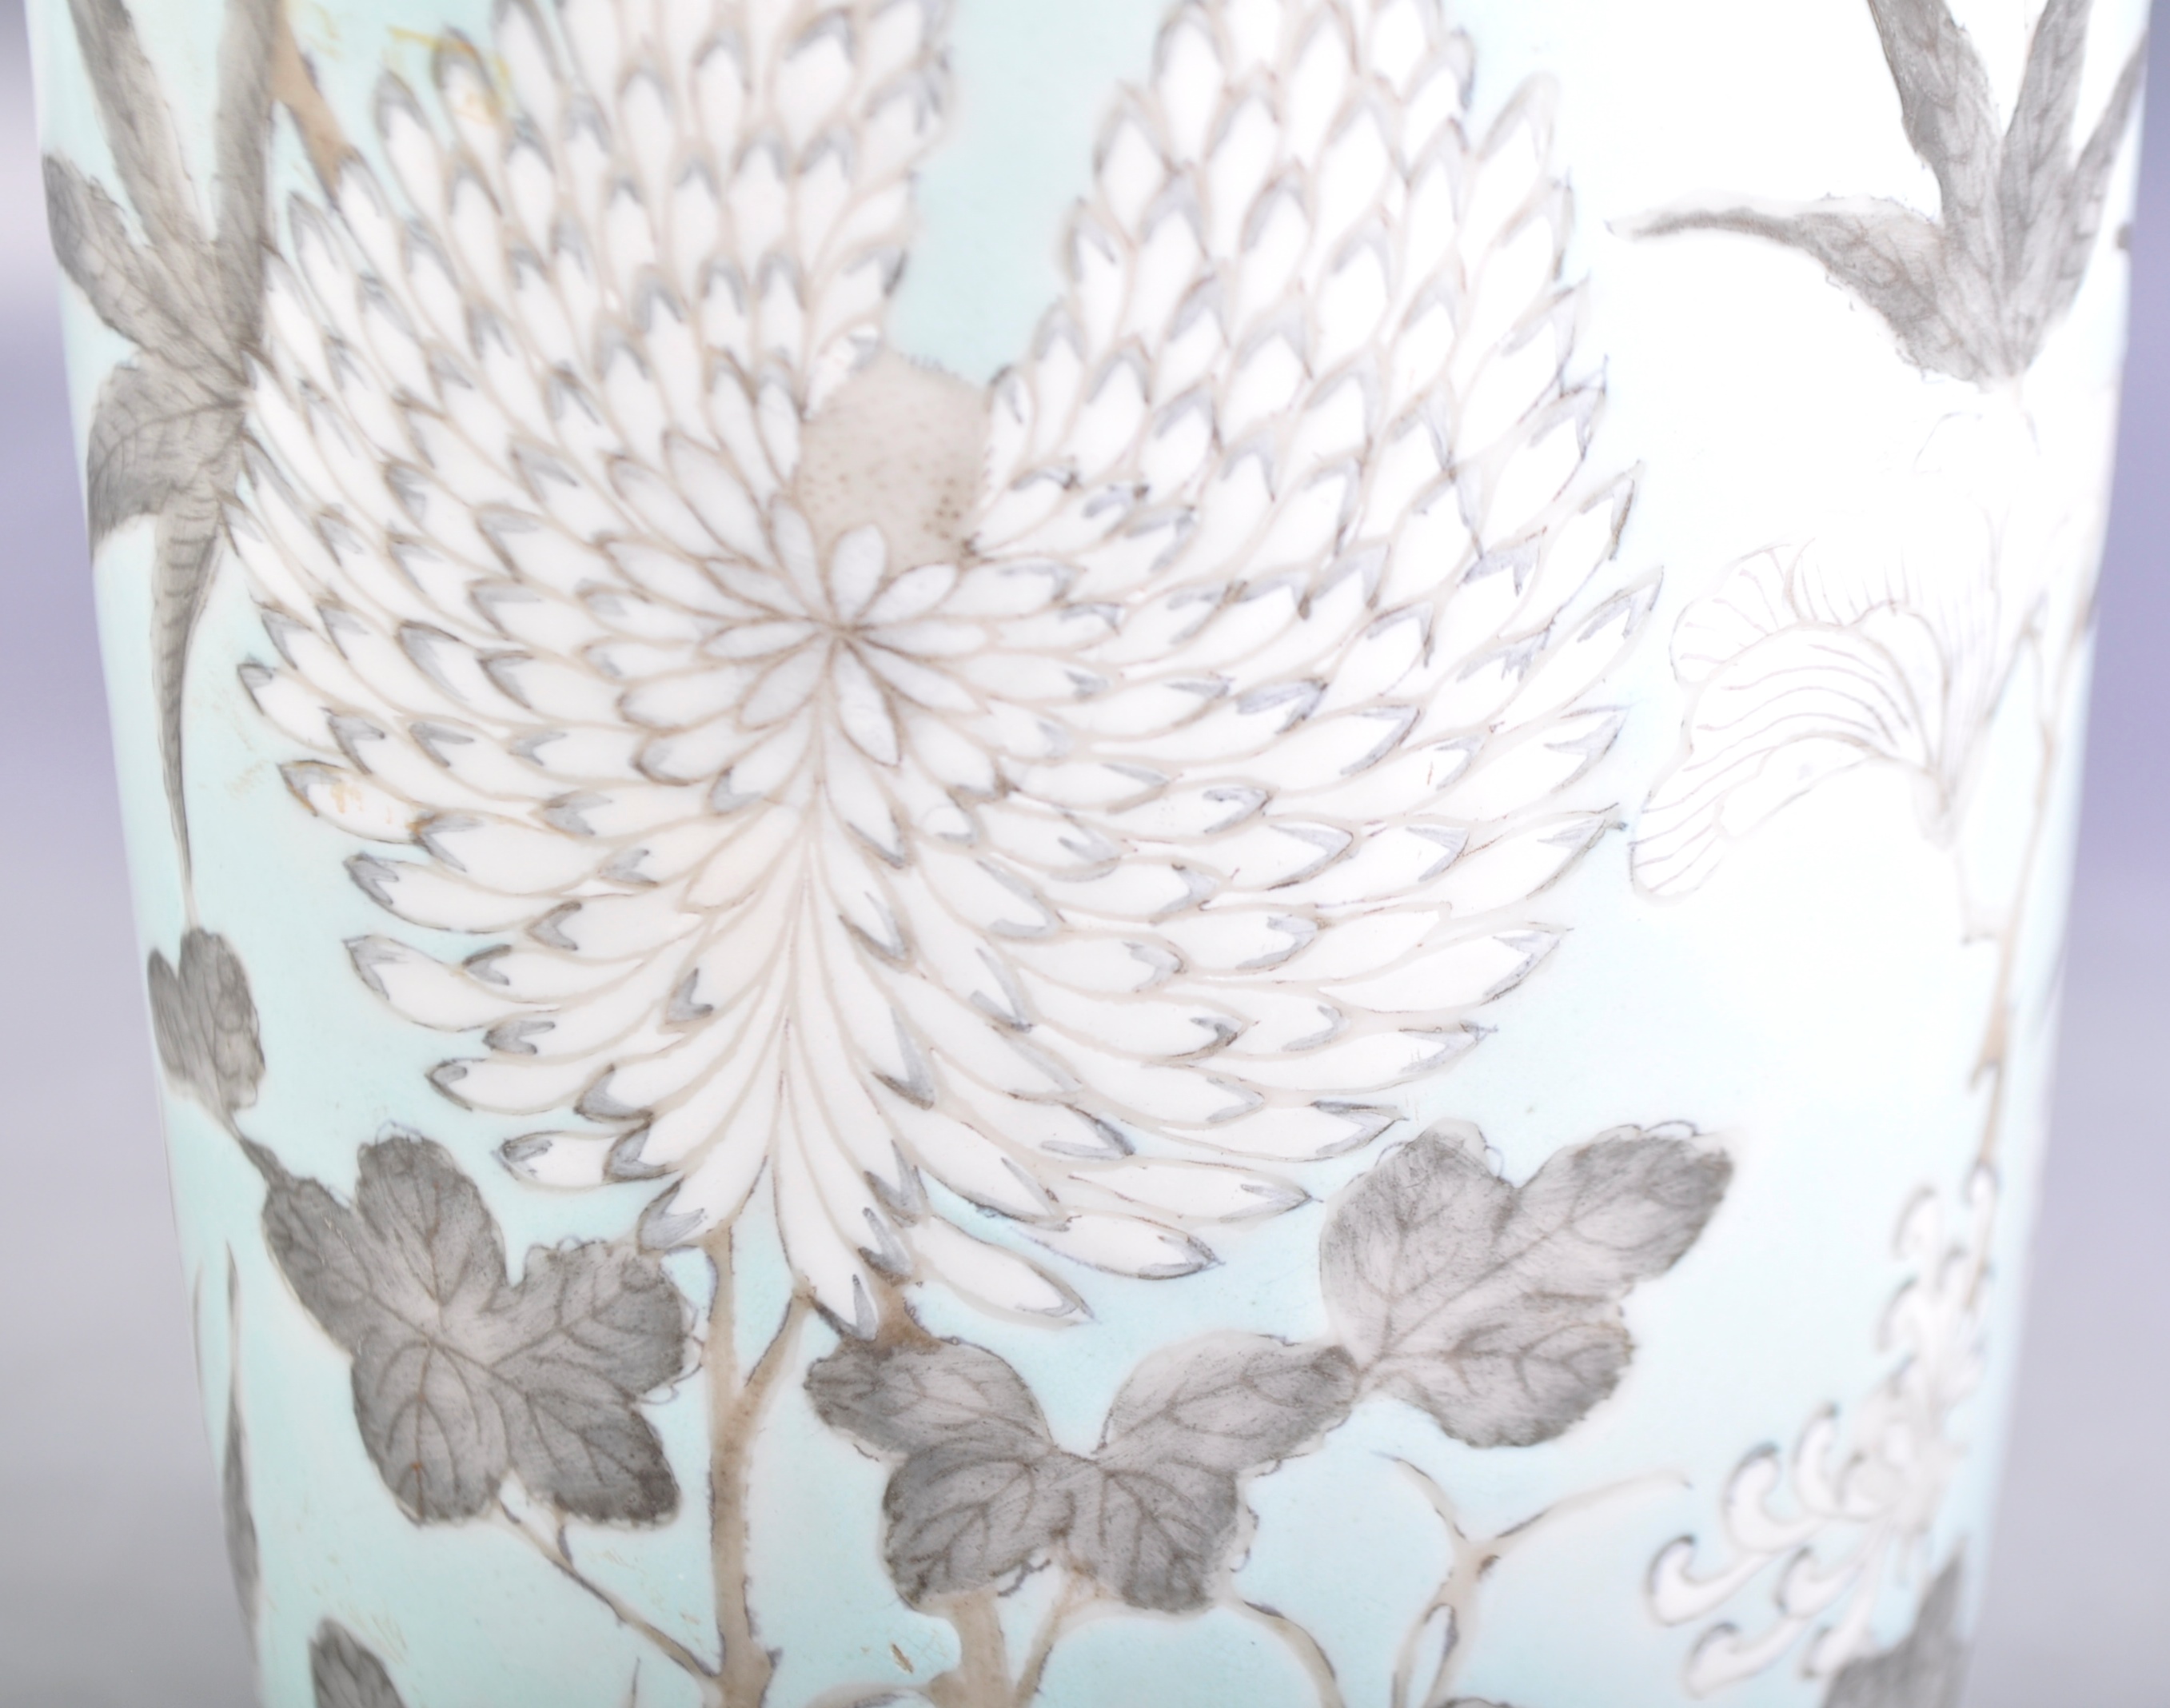 ANTIQUE 19TH CENTURY CHINESE PORCELAIN ROULEAU VASE IN TEAL - Image 5 of 7